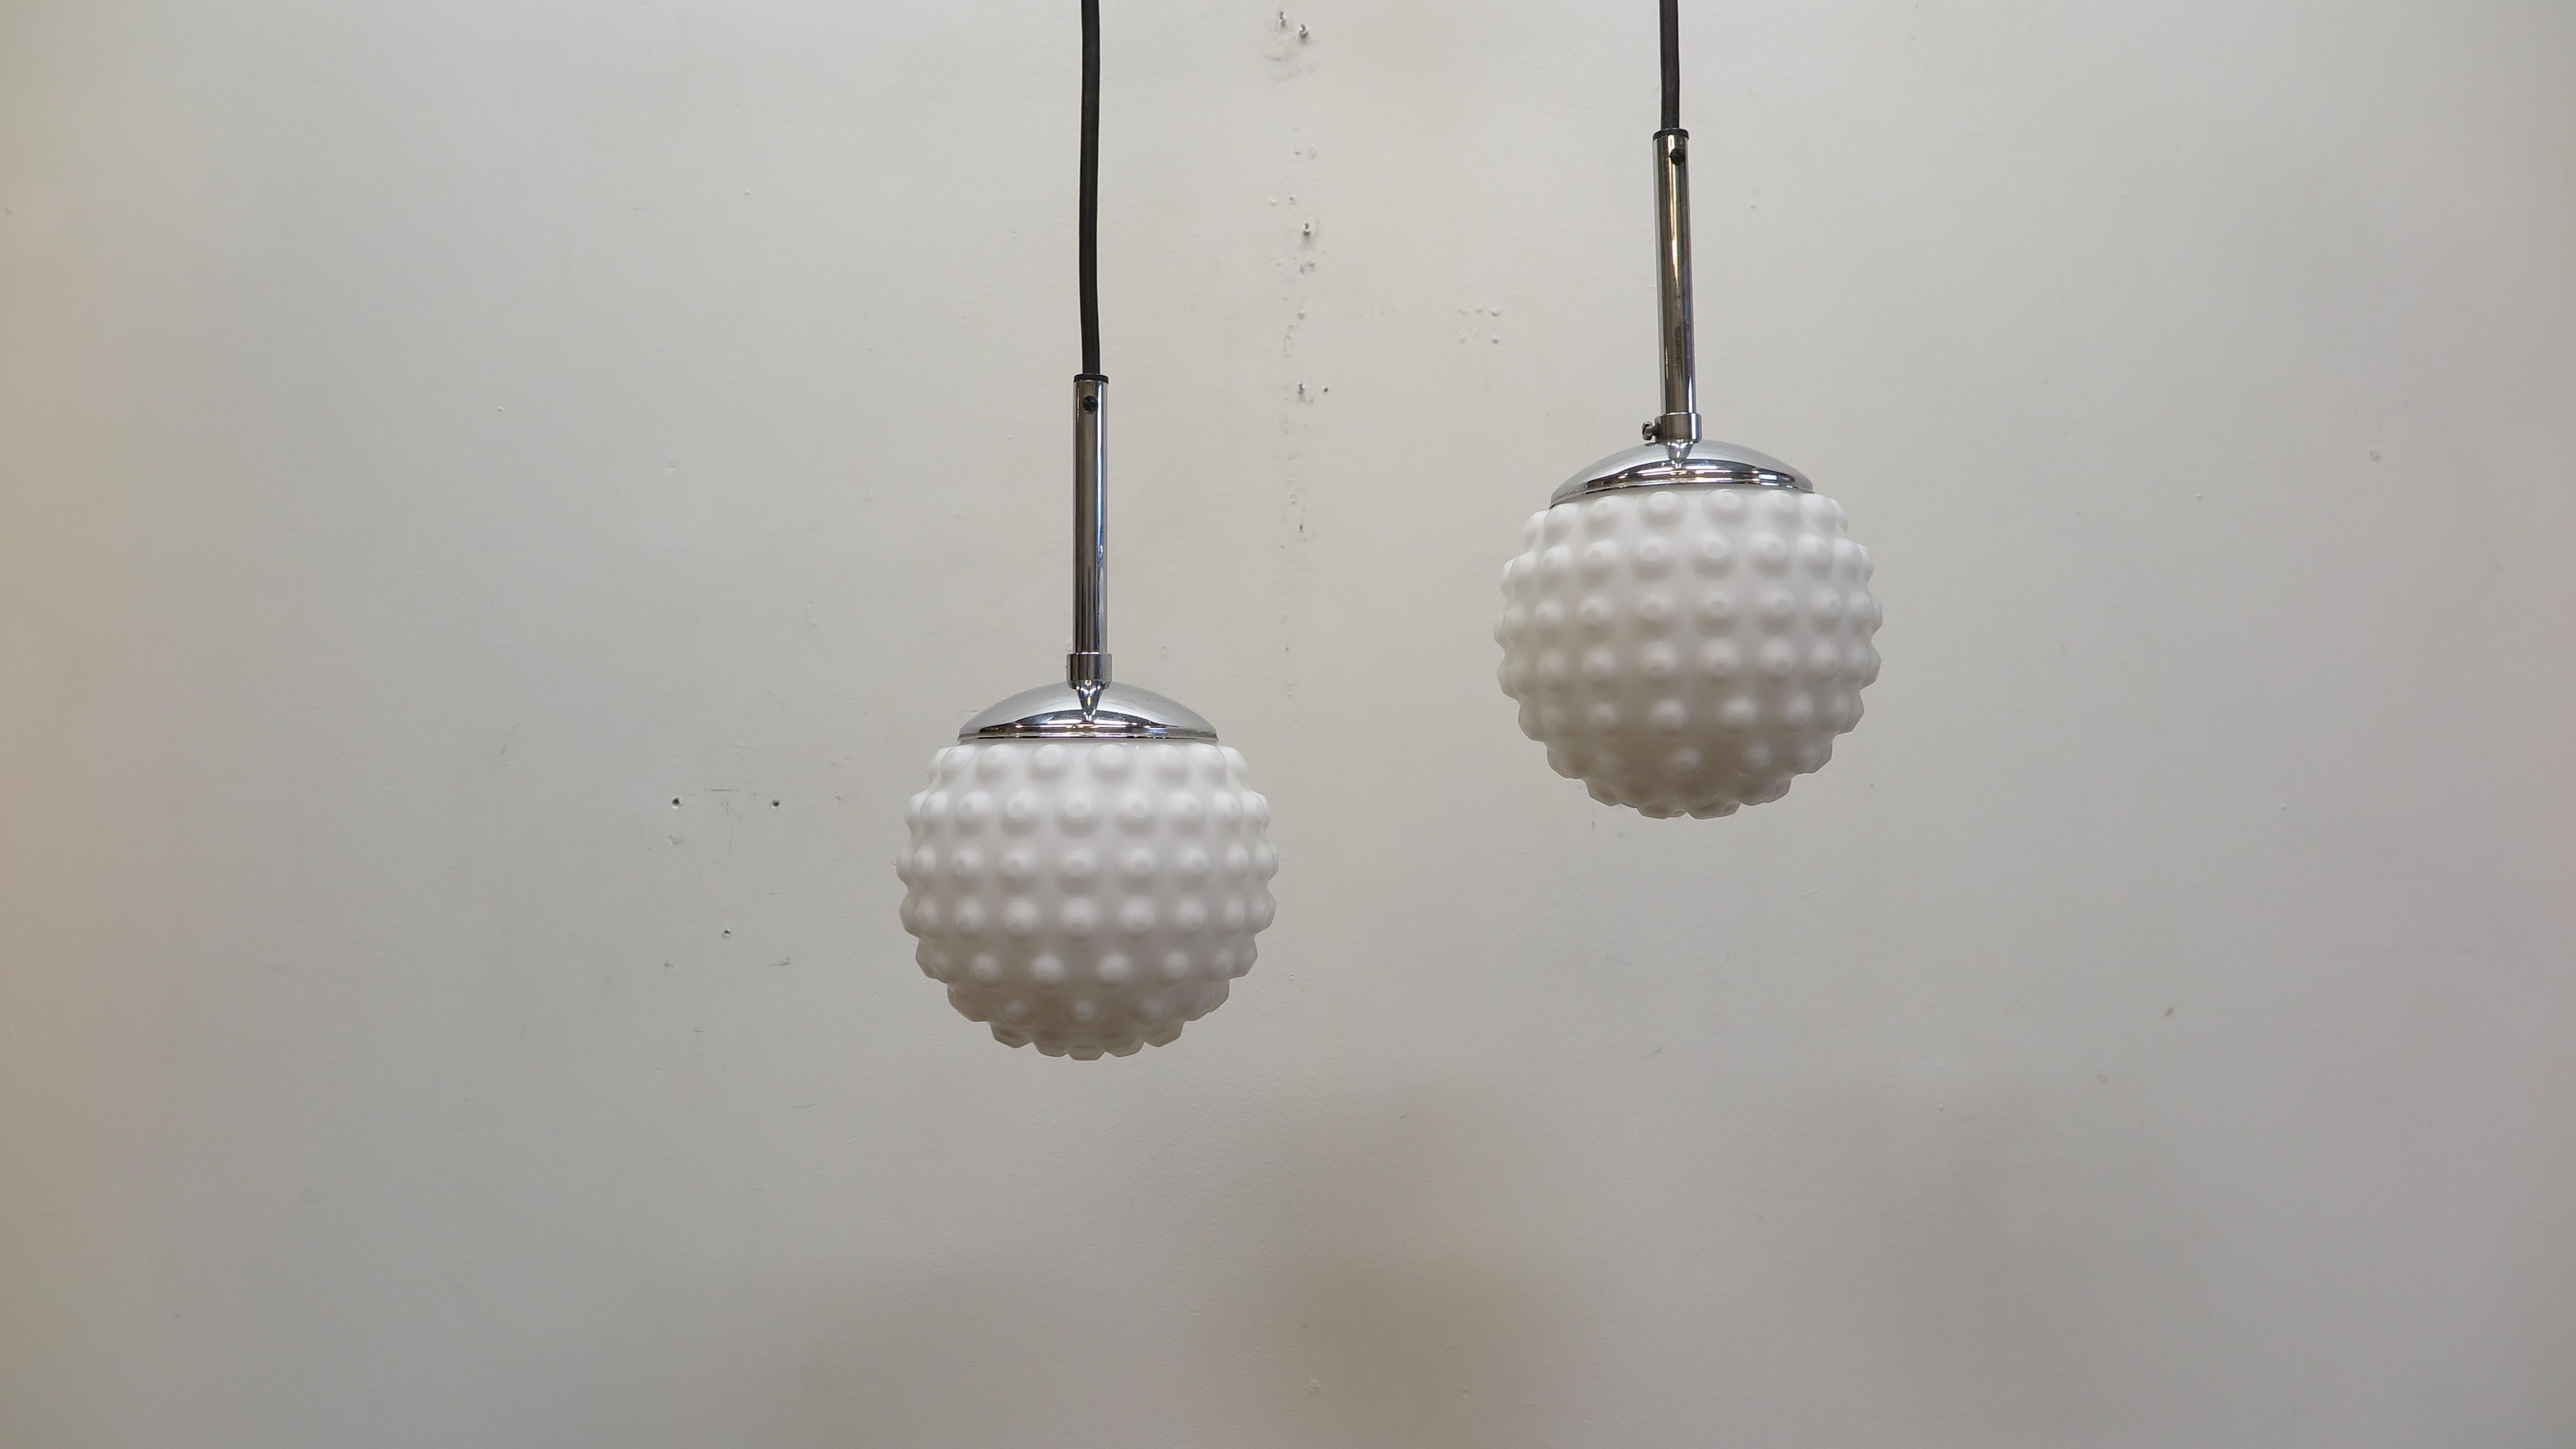 Pair of Mid-Century Modern Snow Ball pendant Lights with bubble texture. Frosted white molded glass snow ball pendants, Doria Leuchten, Germany 1970's. Chrome shafts supporting textured white glass Spheres. In very good condition. 
Height is